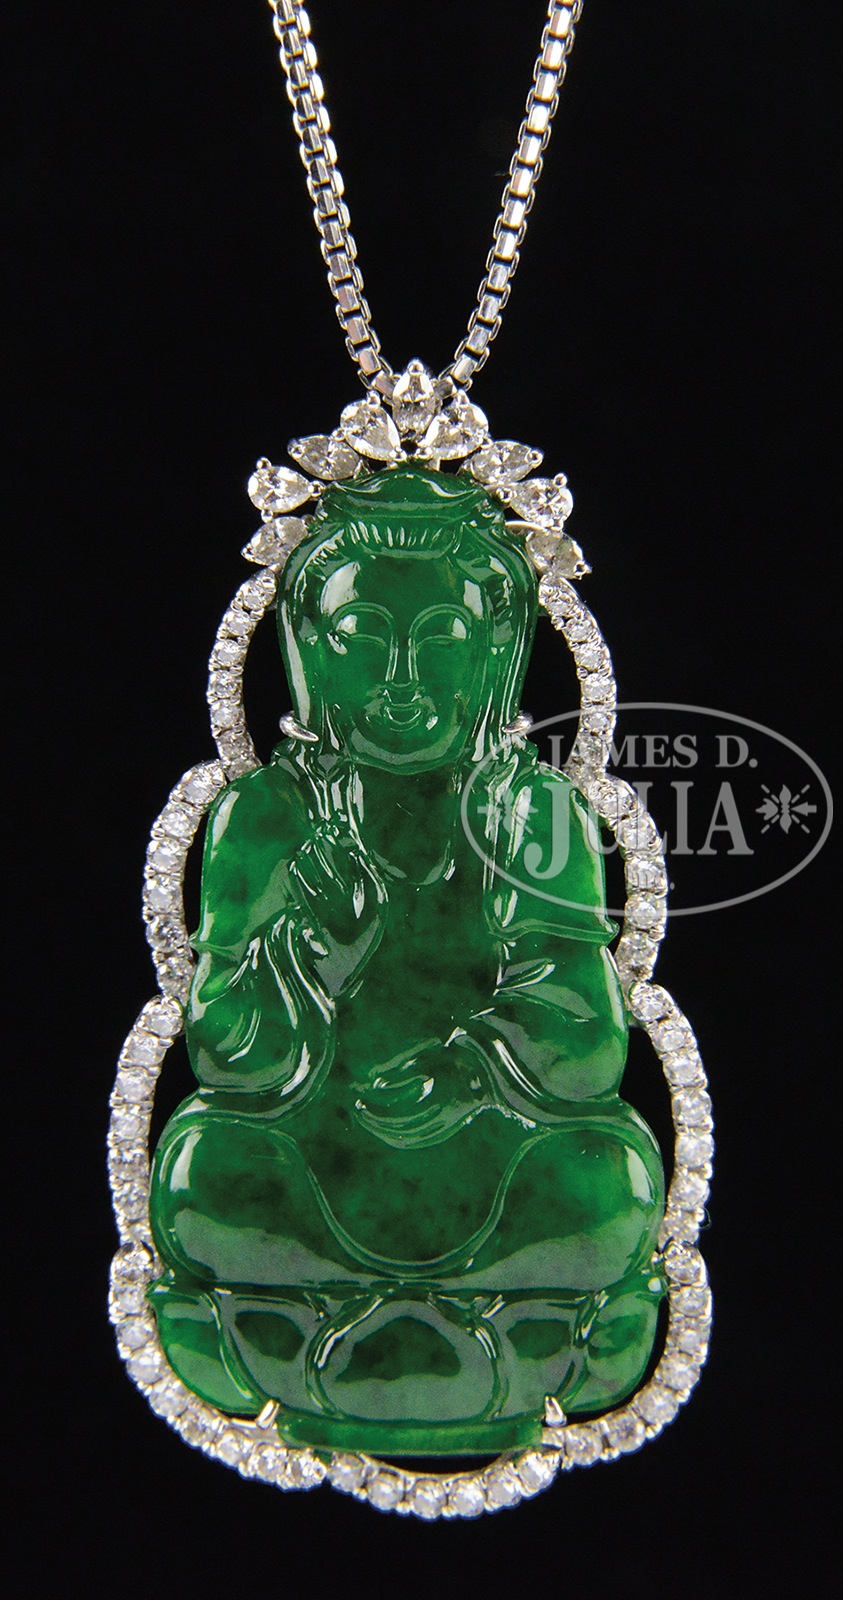 CARVED ICY TRANSPARENT JADEITE GUANYIN PENDANT WITH WHITE GOLD NECKLACE. The beautifully carved